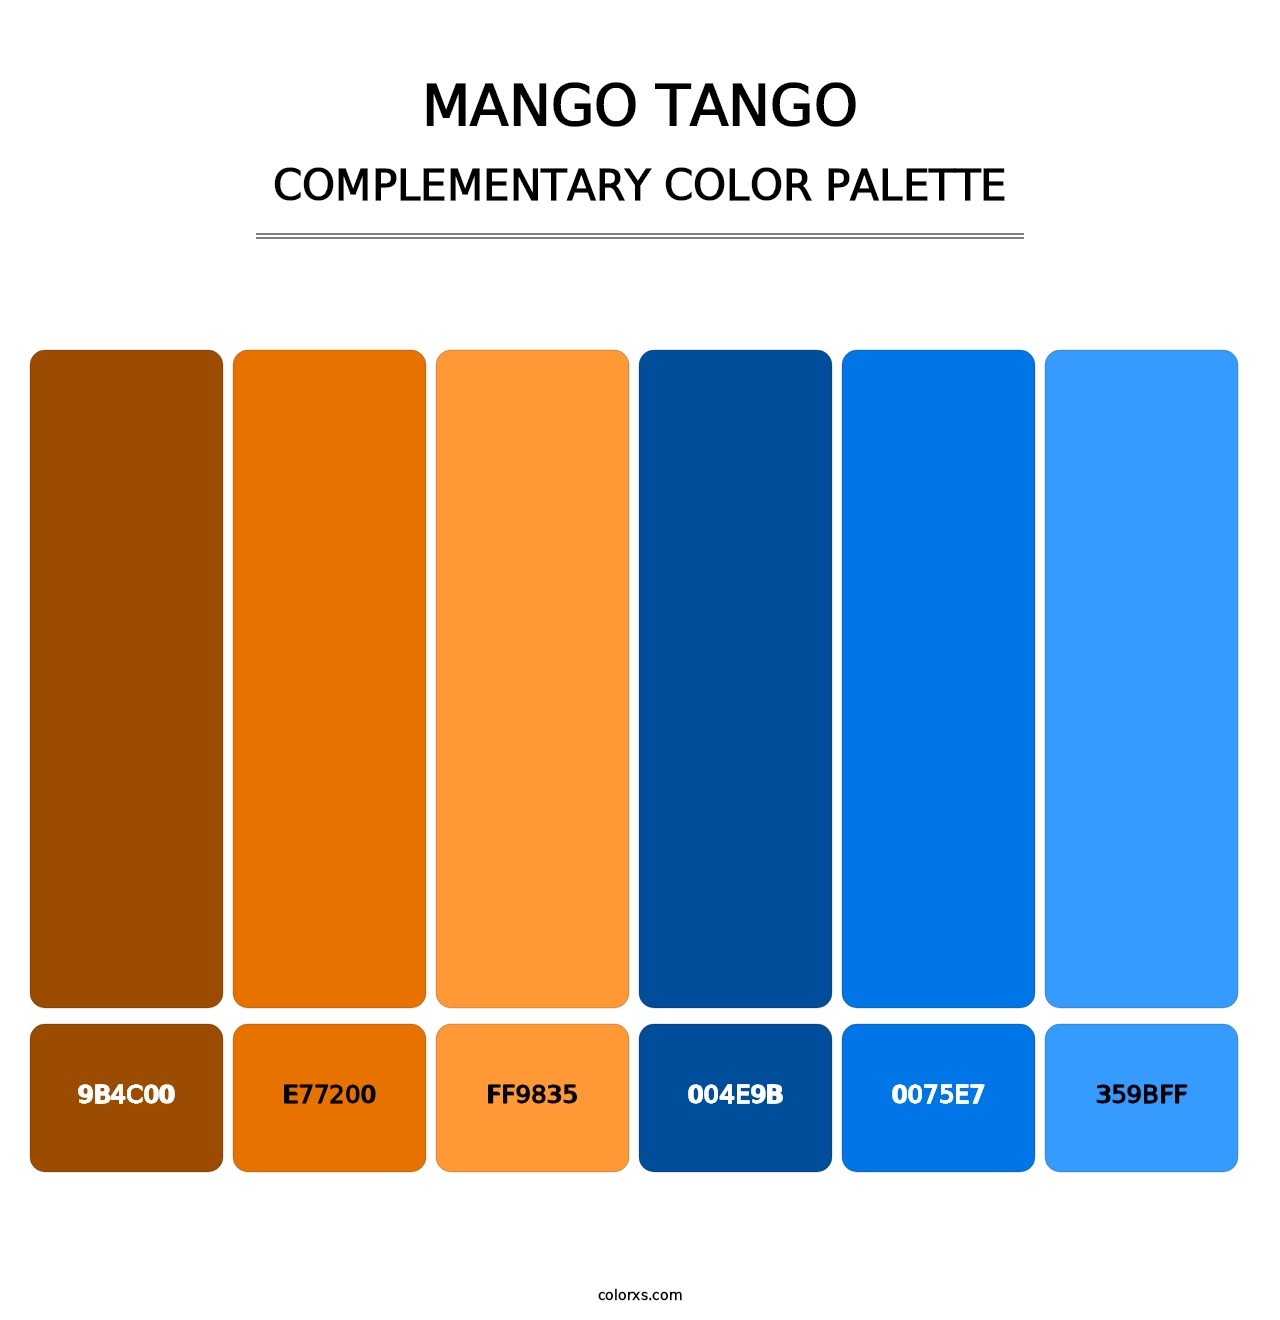 Mango Tango - Complementary Color Palette